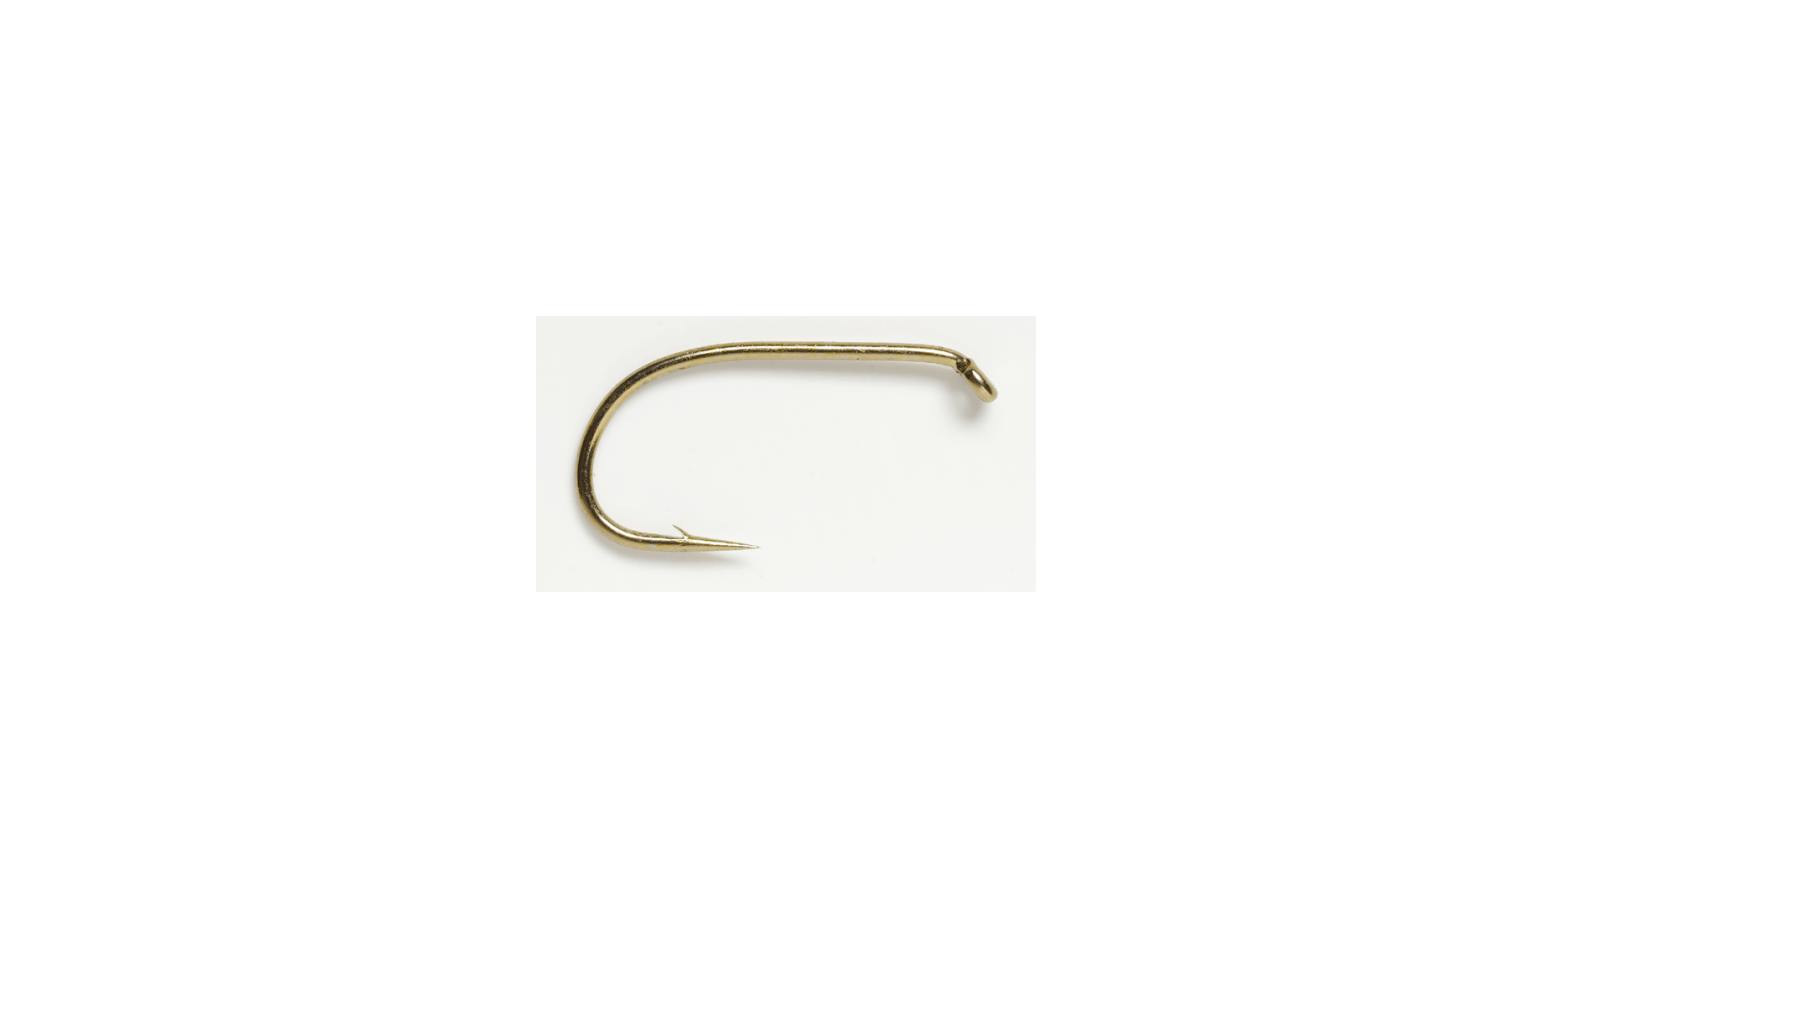 NEW TROUT FLY TYING 24 x DOUBLE HOOKS SIZE 12 NICKEL SILVER FISHING fly fishing 